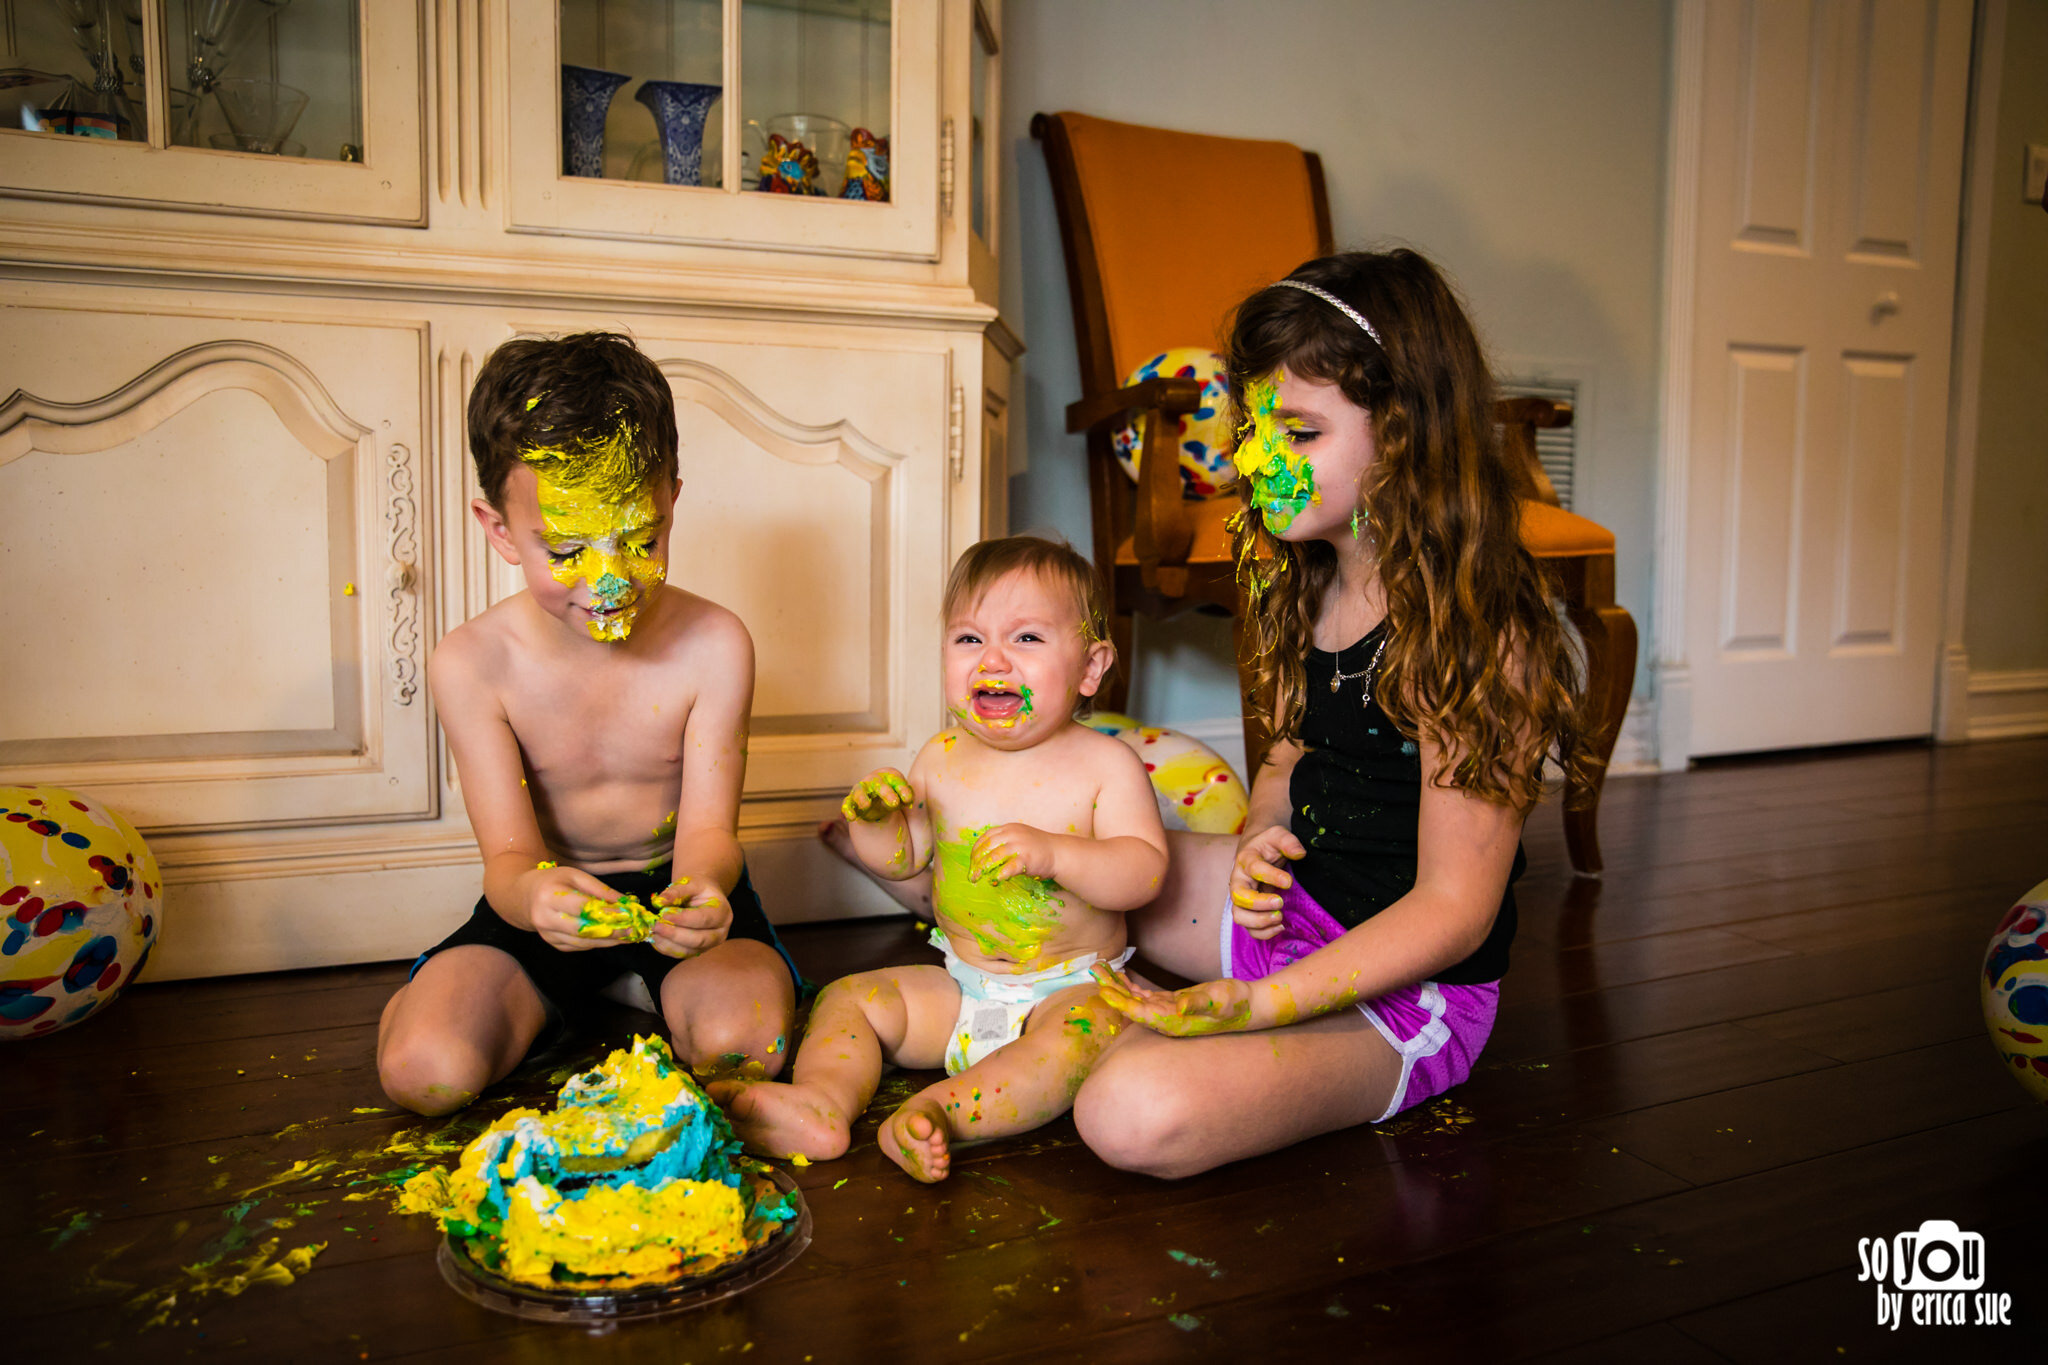 1-so-you-by-erica-sue-first-1st-birthday-cake-smash-in-home-lifestyle-photography-hollywood-fl-0702.JPG